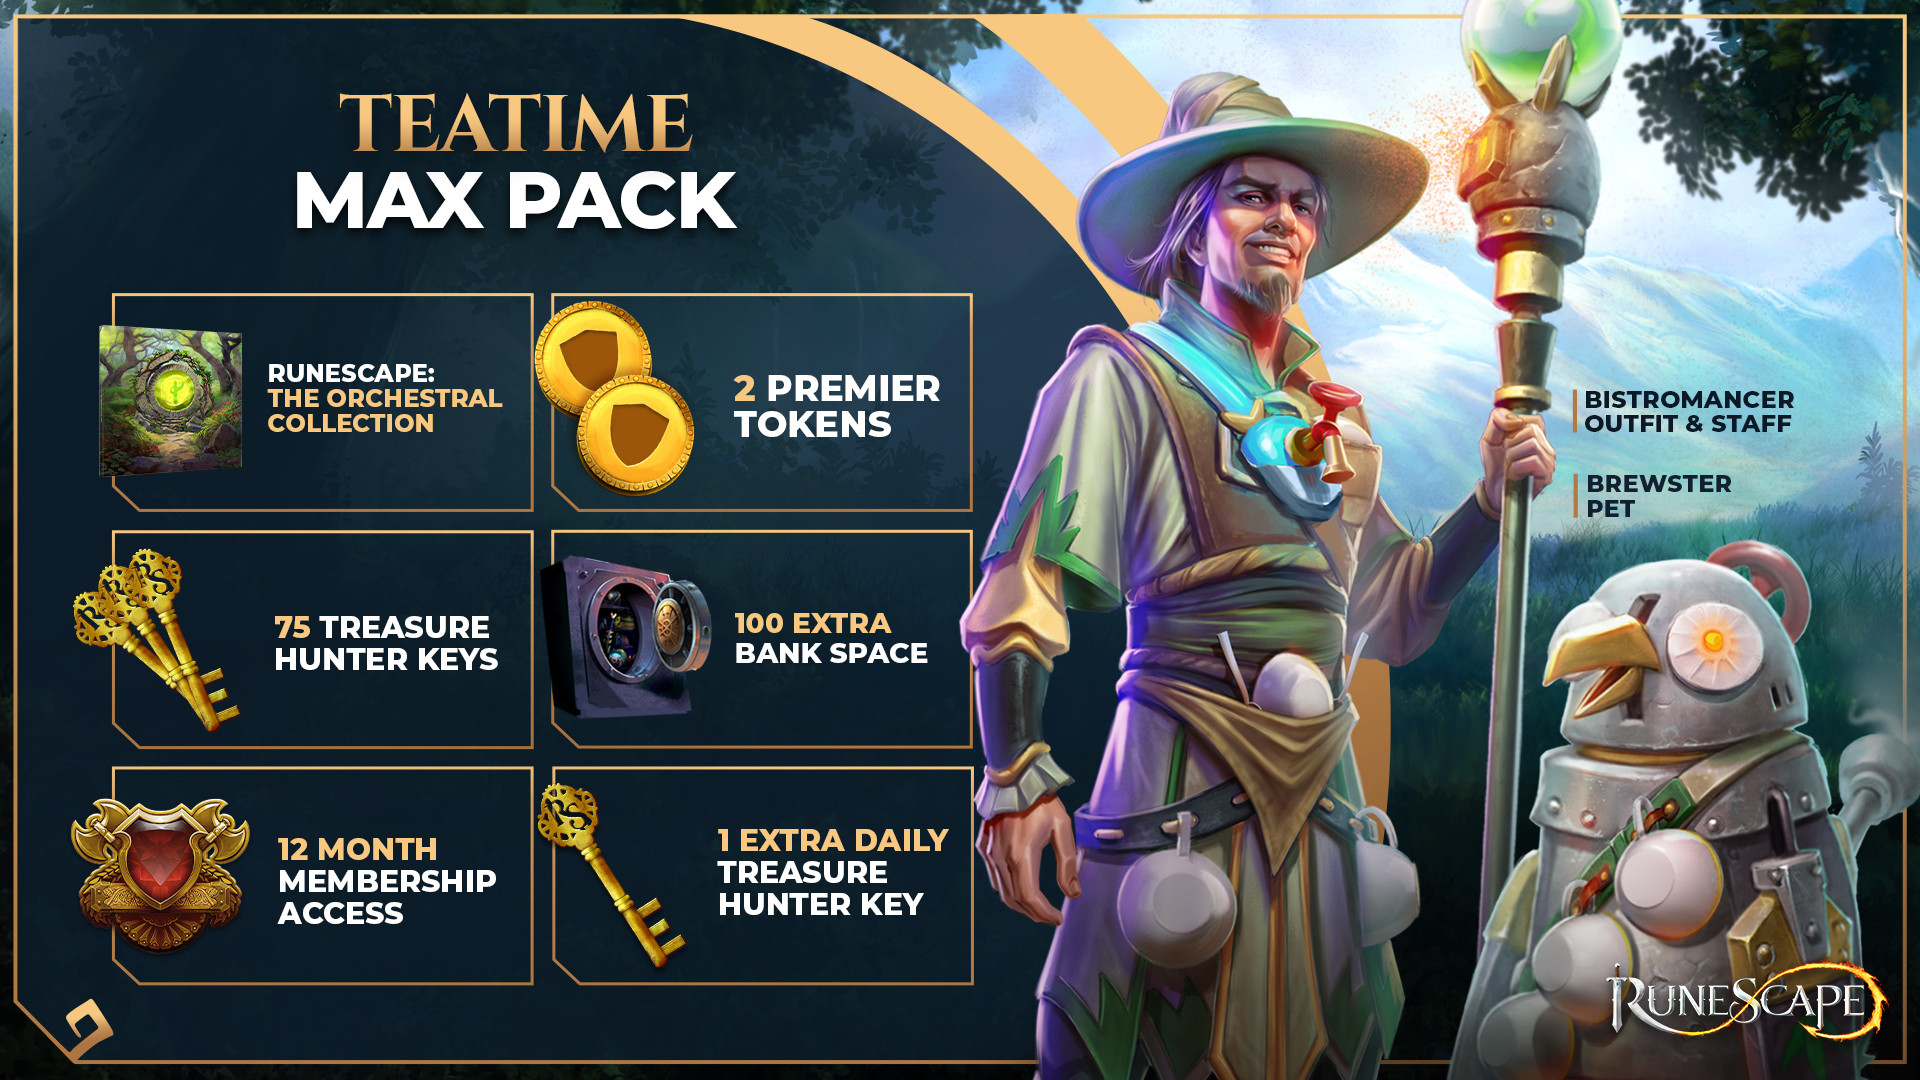 Runescape - Max Pack + 12 Months Membership Manual Delivery, 56.49 usd